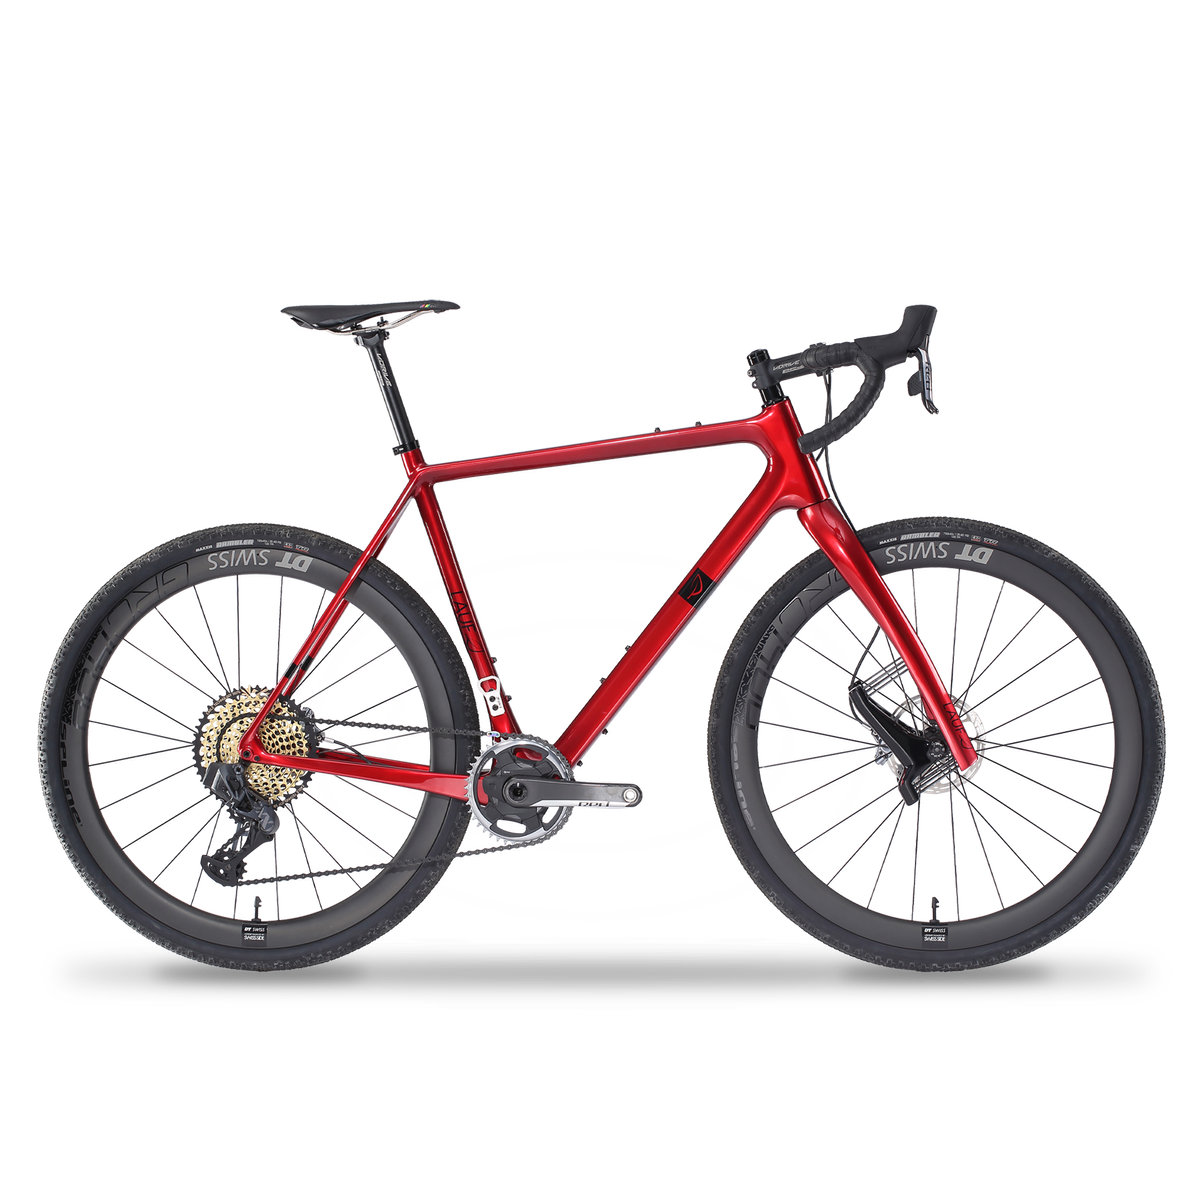 Lauf Bikes are Now Direct to Consumer, $1,000+ Cut Off All Prices